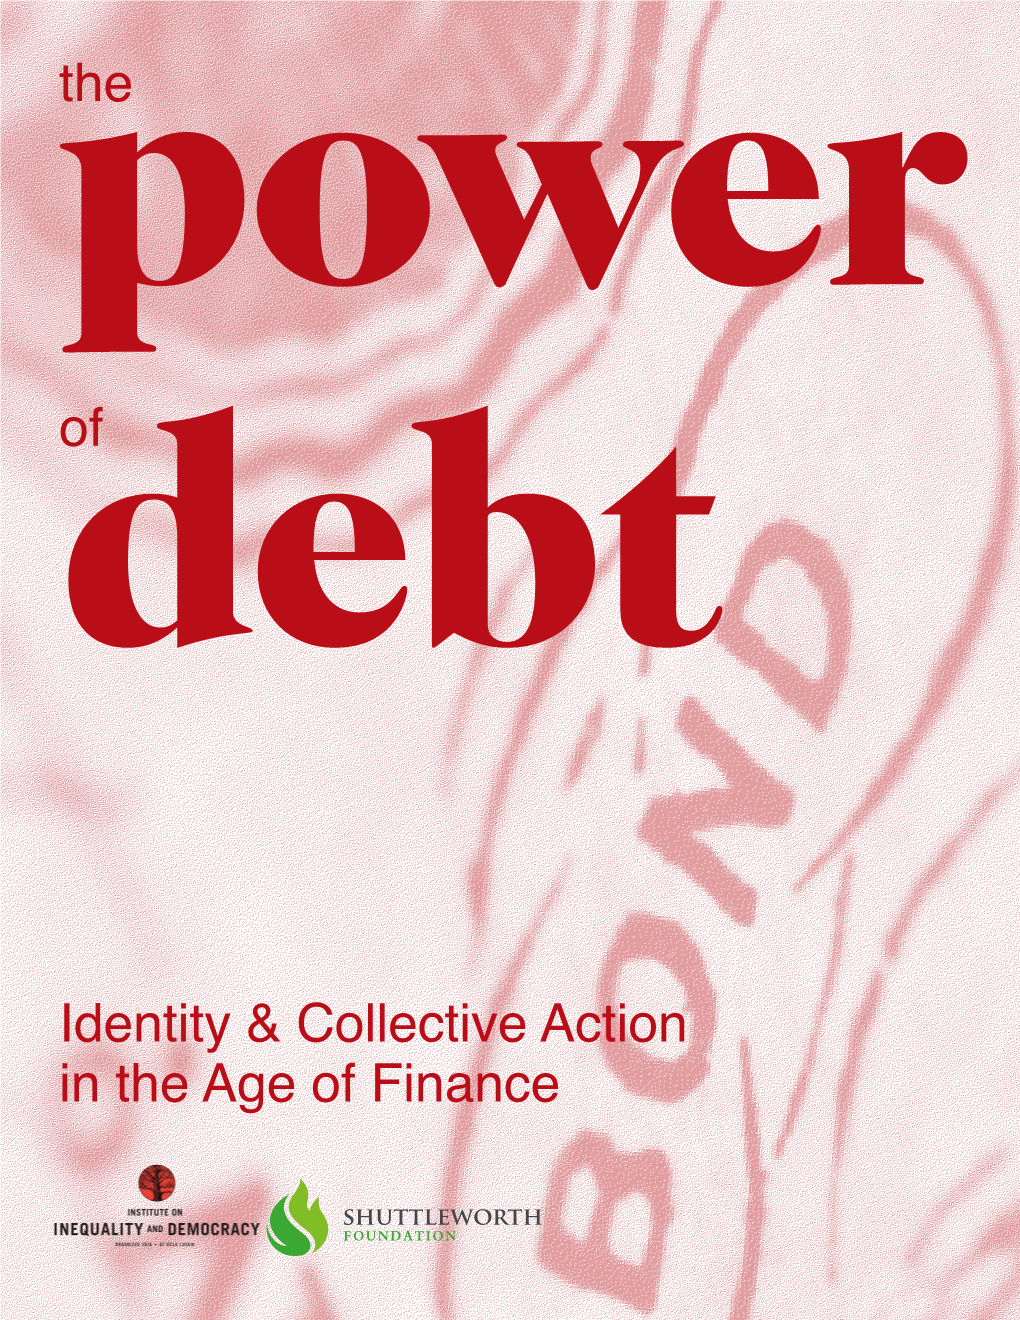 Identity & Collective Action the of in the Age of Finance